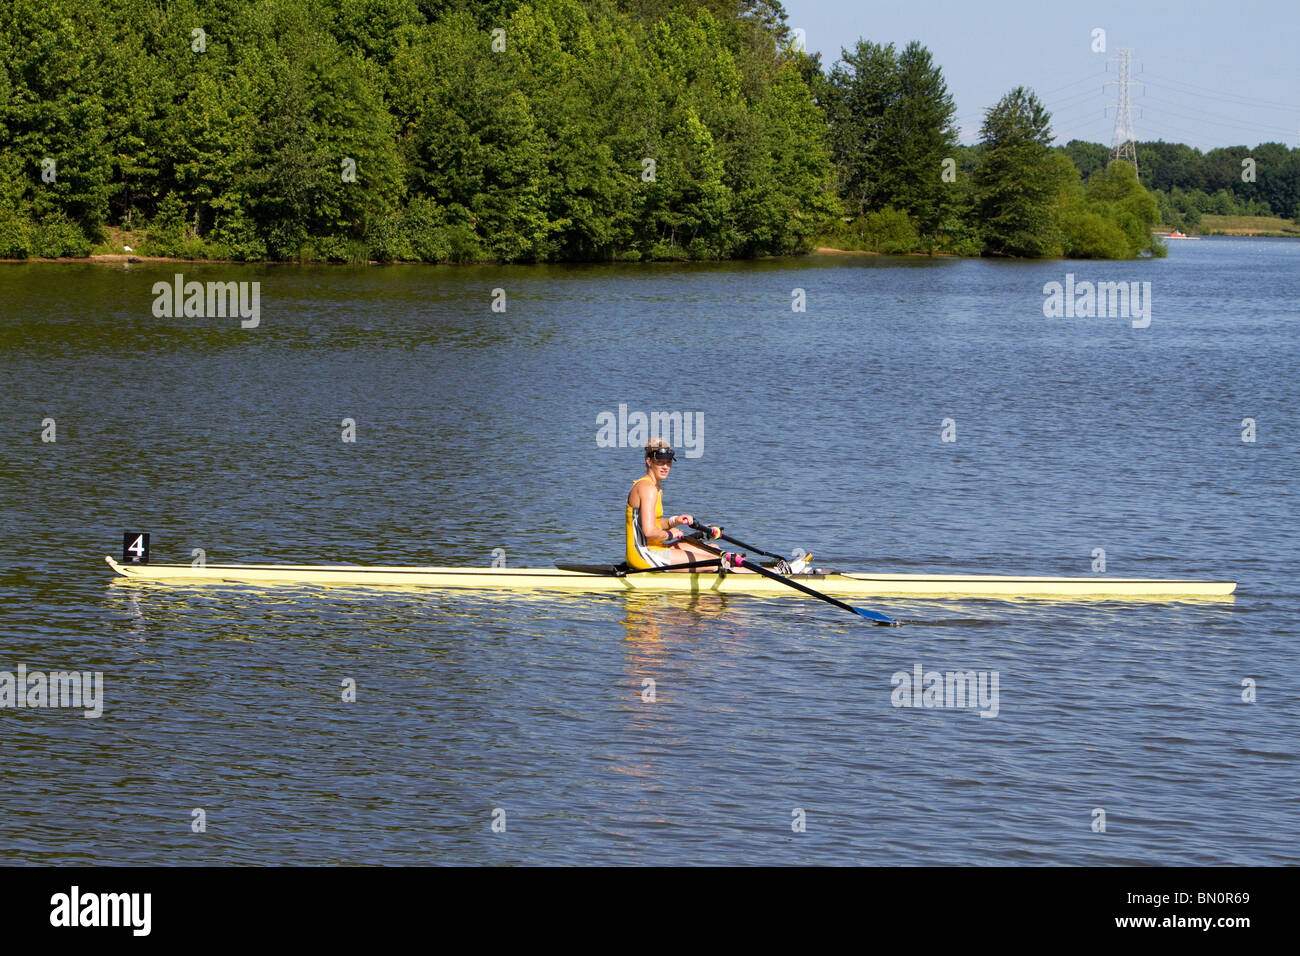 A Young female rower at the US Rowing National Championship Regatta at Mercer County Park New Jersey. Lake Mercer. Stock Photo